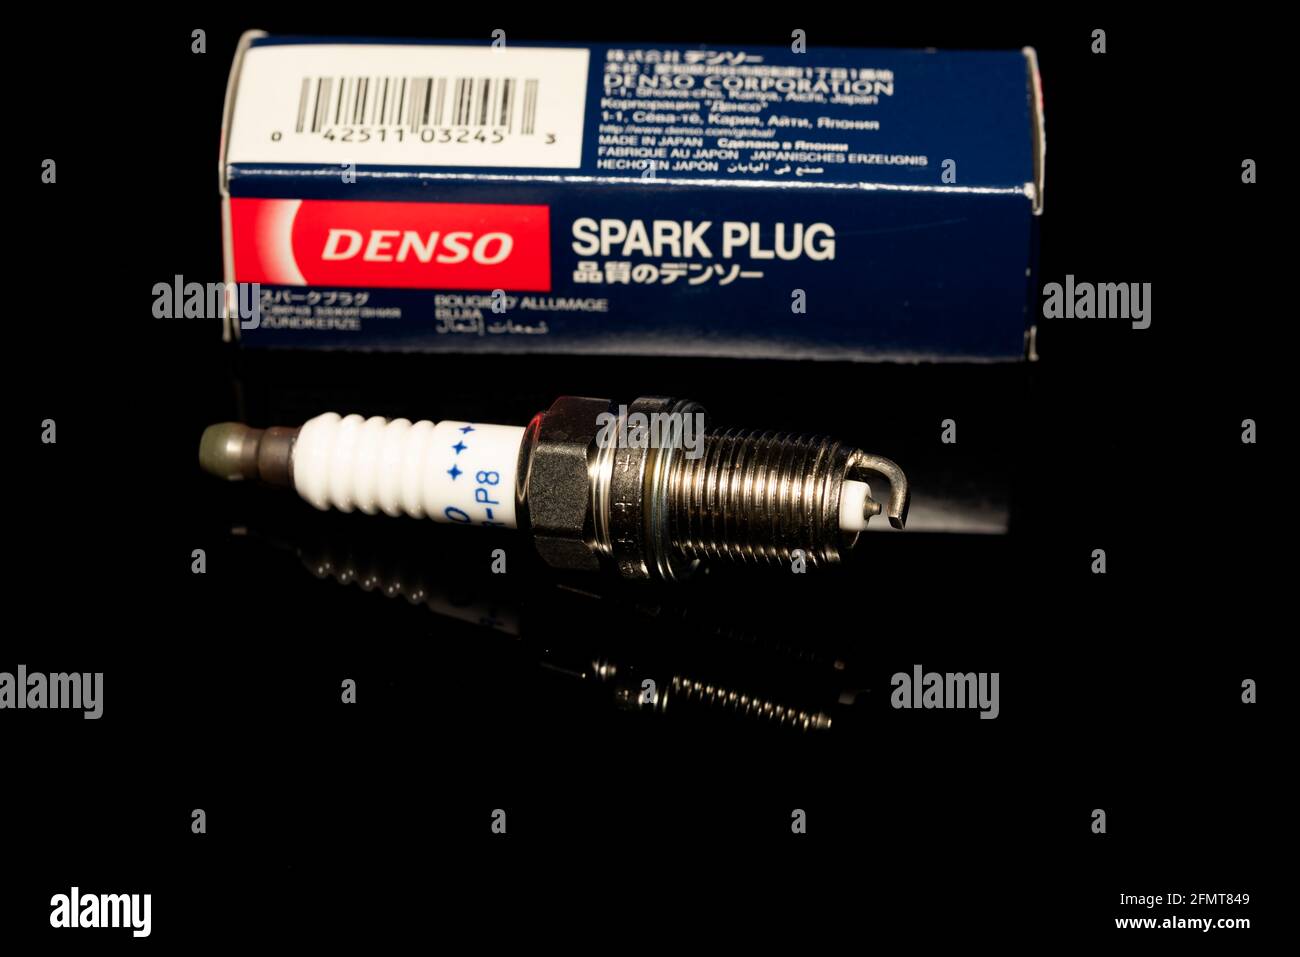 A new single spark plug for a petrol combustion engine. Stock Photo